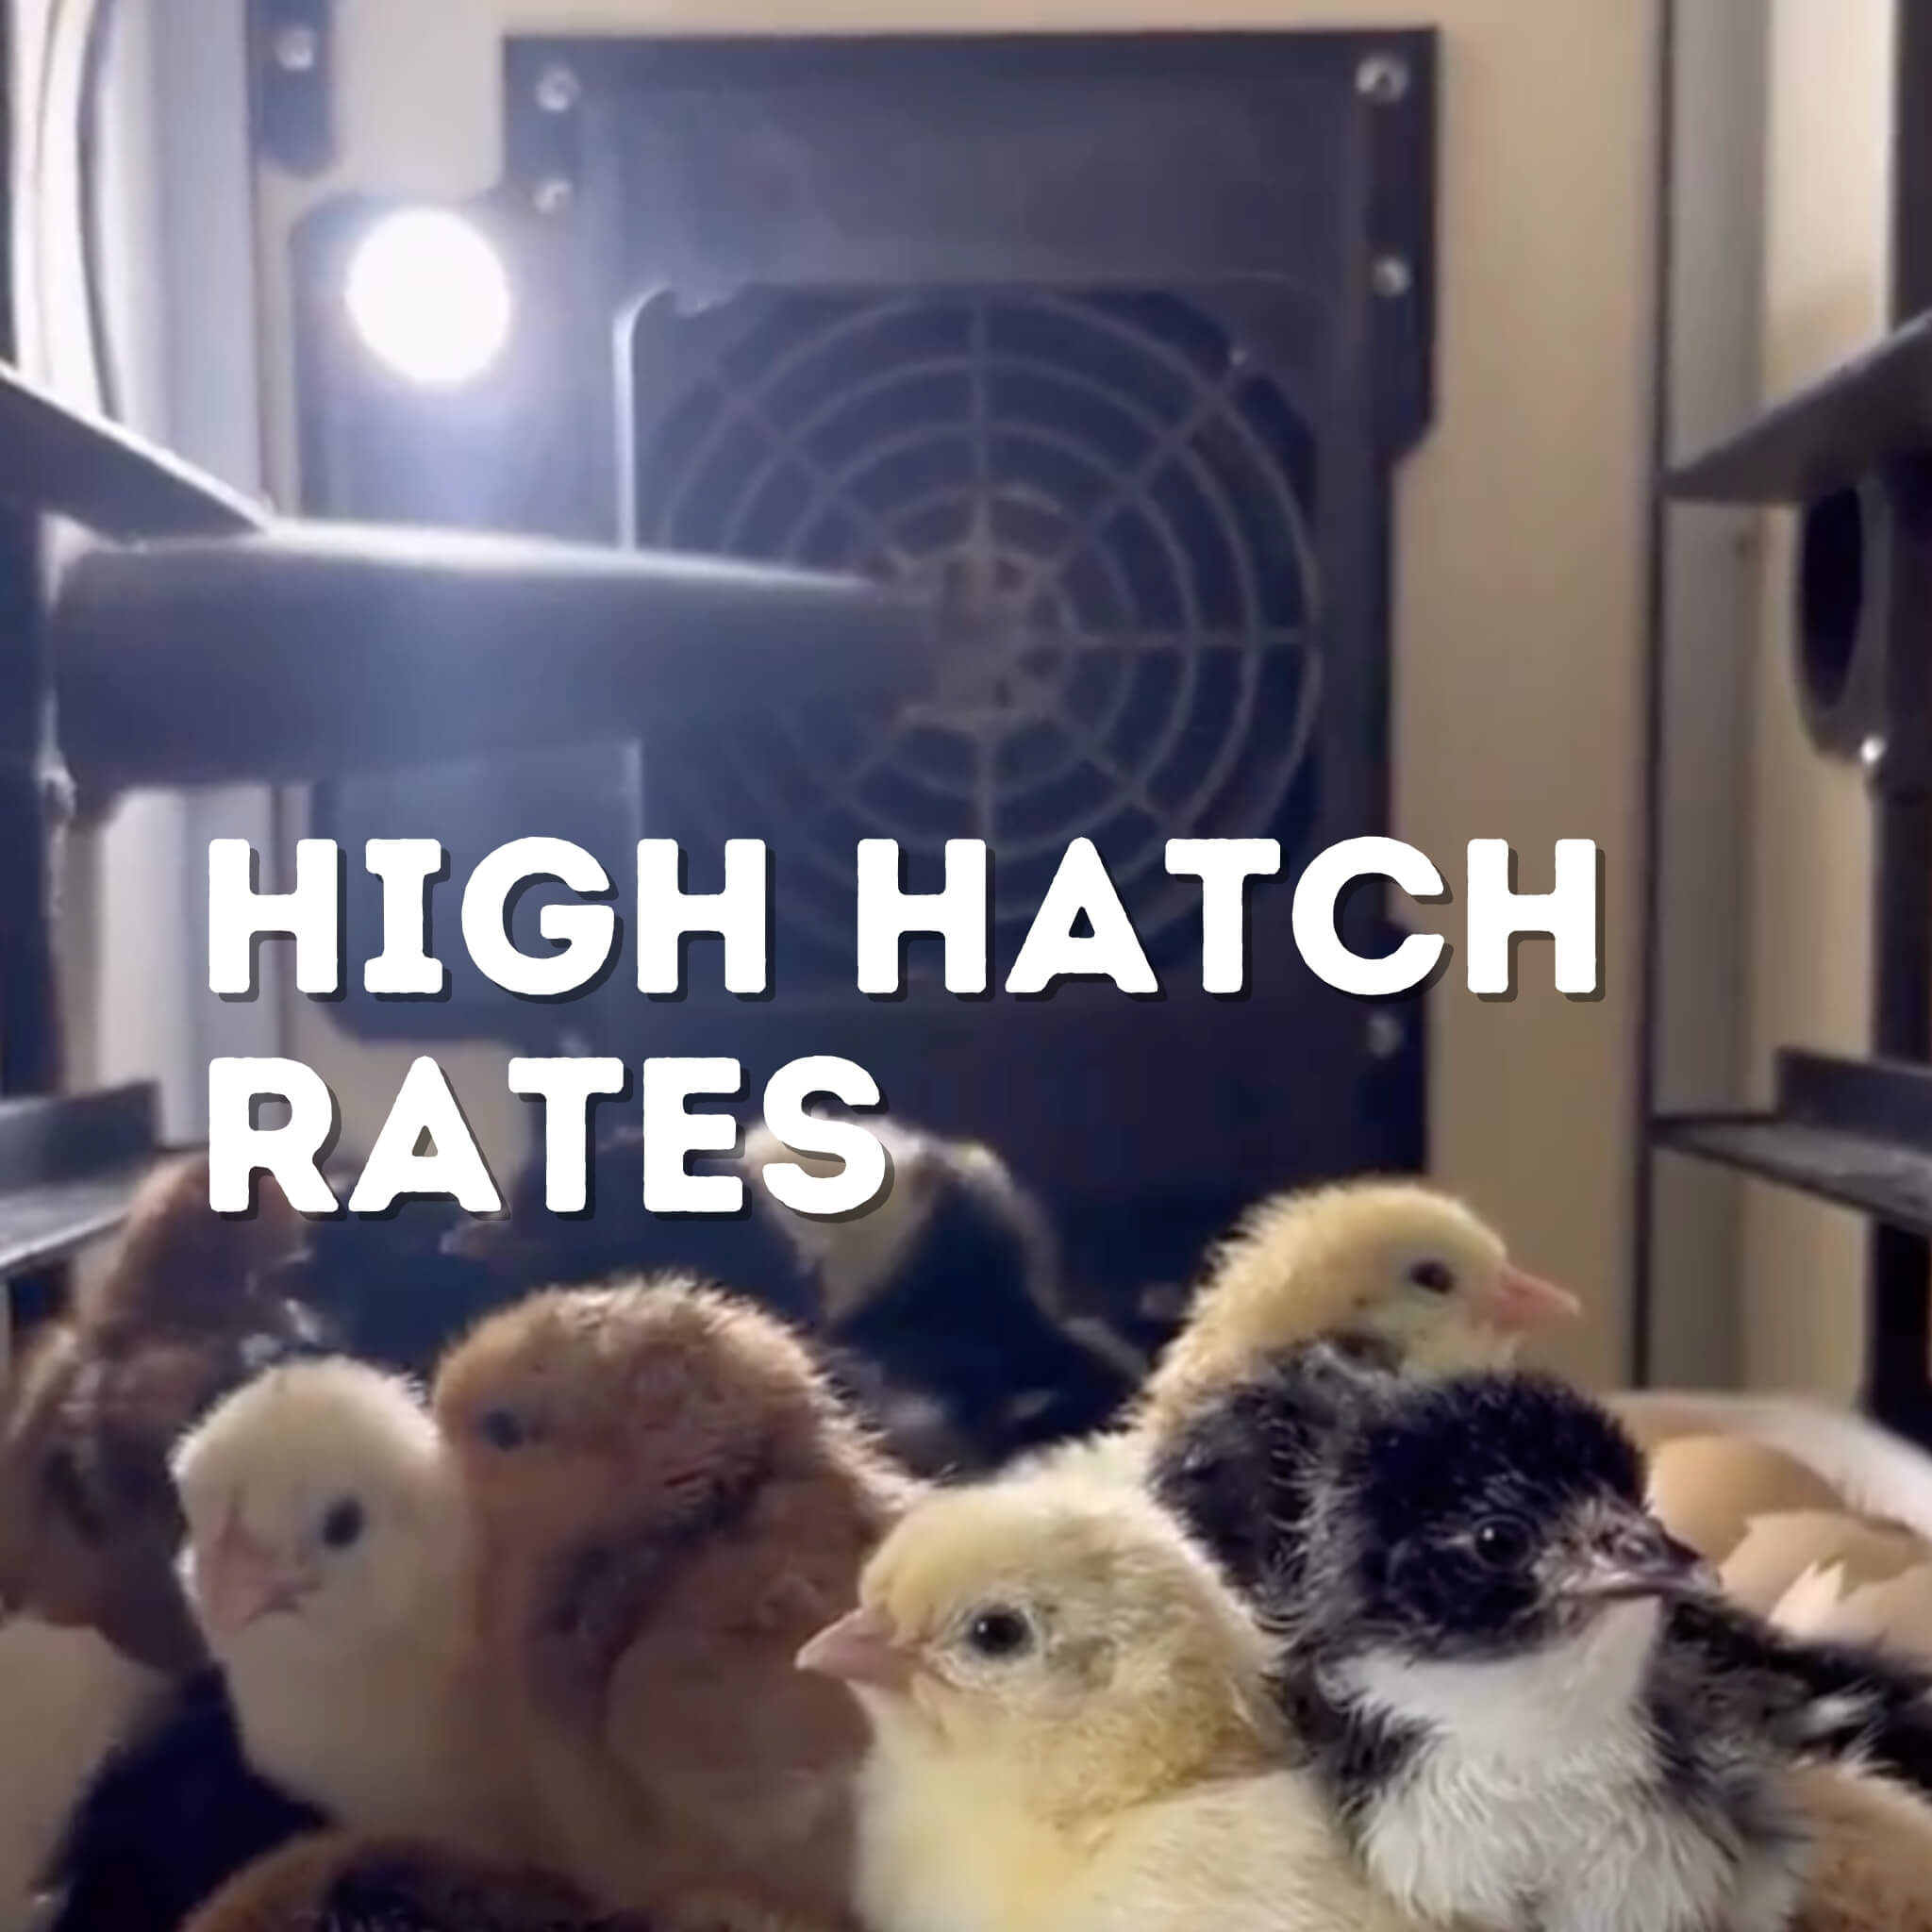 Internal view of Cimuka CT60SH showing chicks hatching and emphasizing high hatch rates due to automatic patented control system